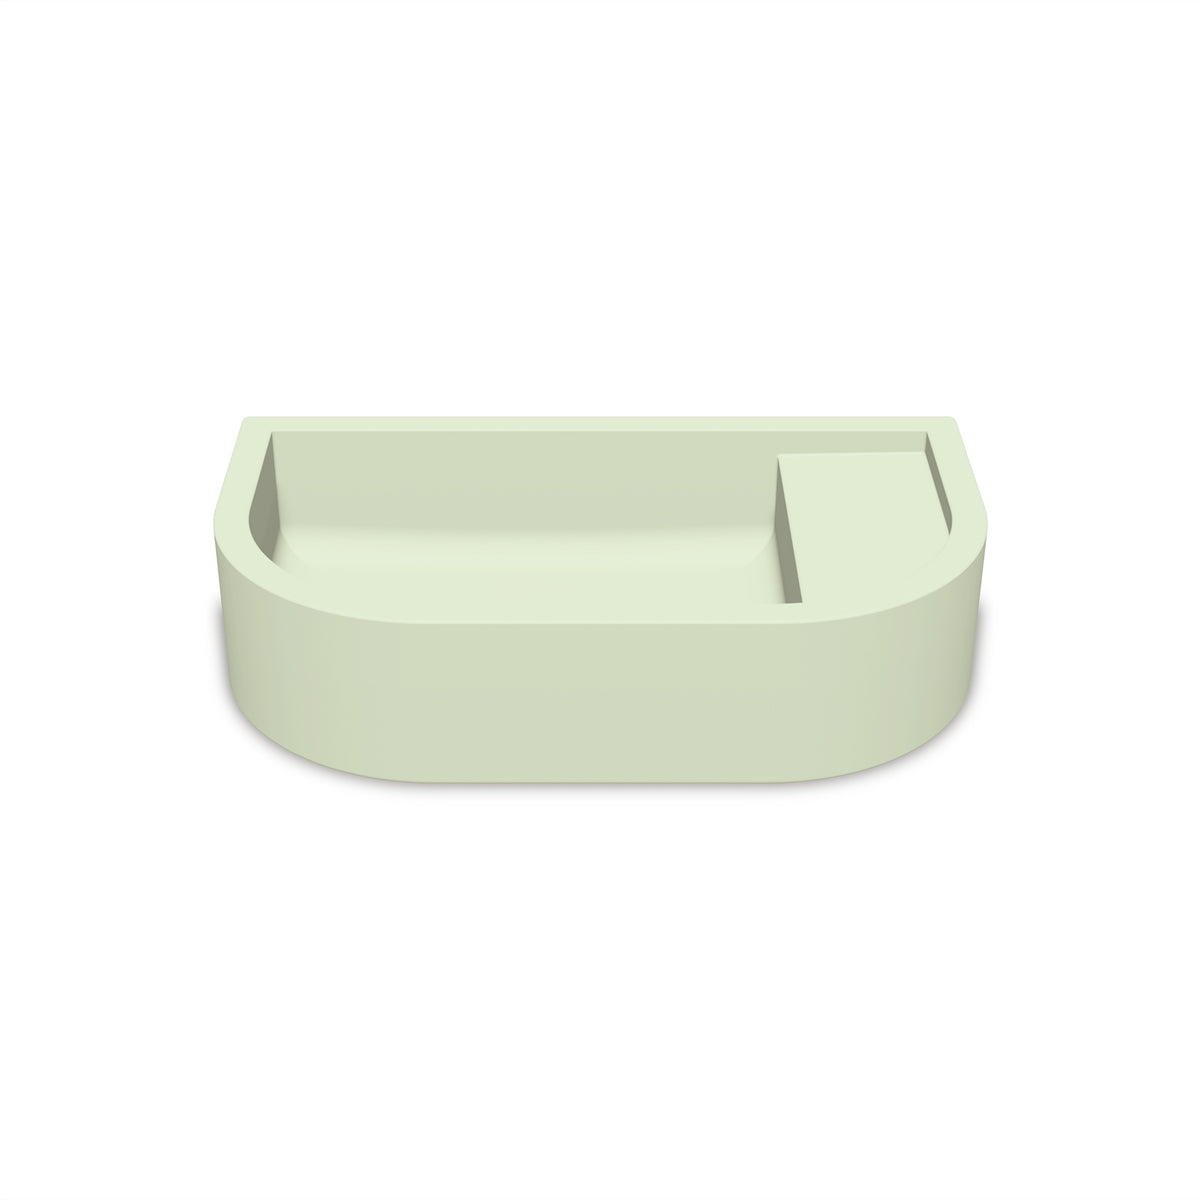 Loop 02 Basin - Surface Mount (Mint,No Tap Hole)